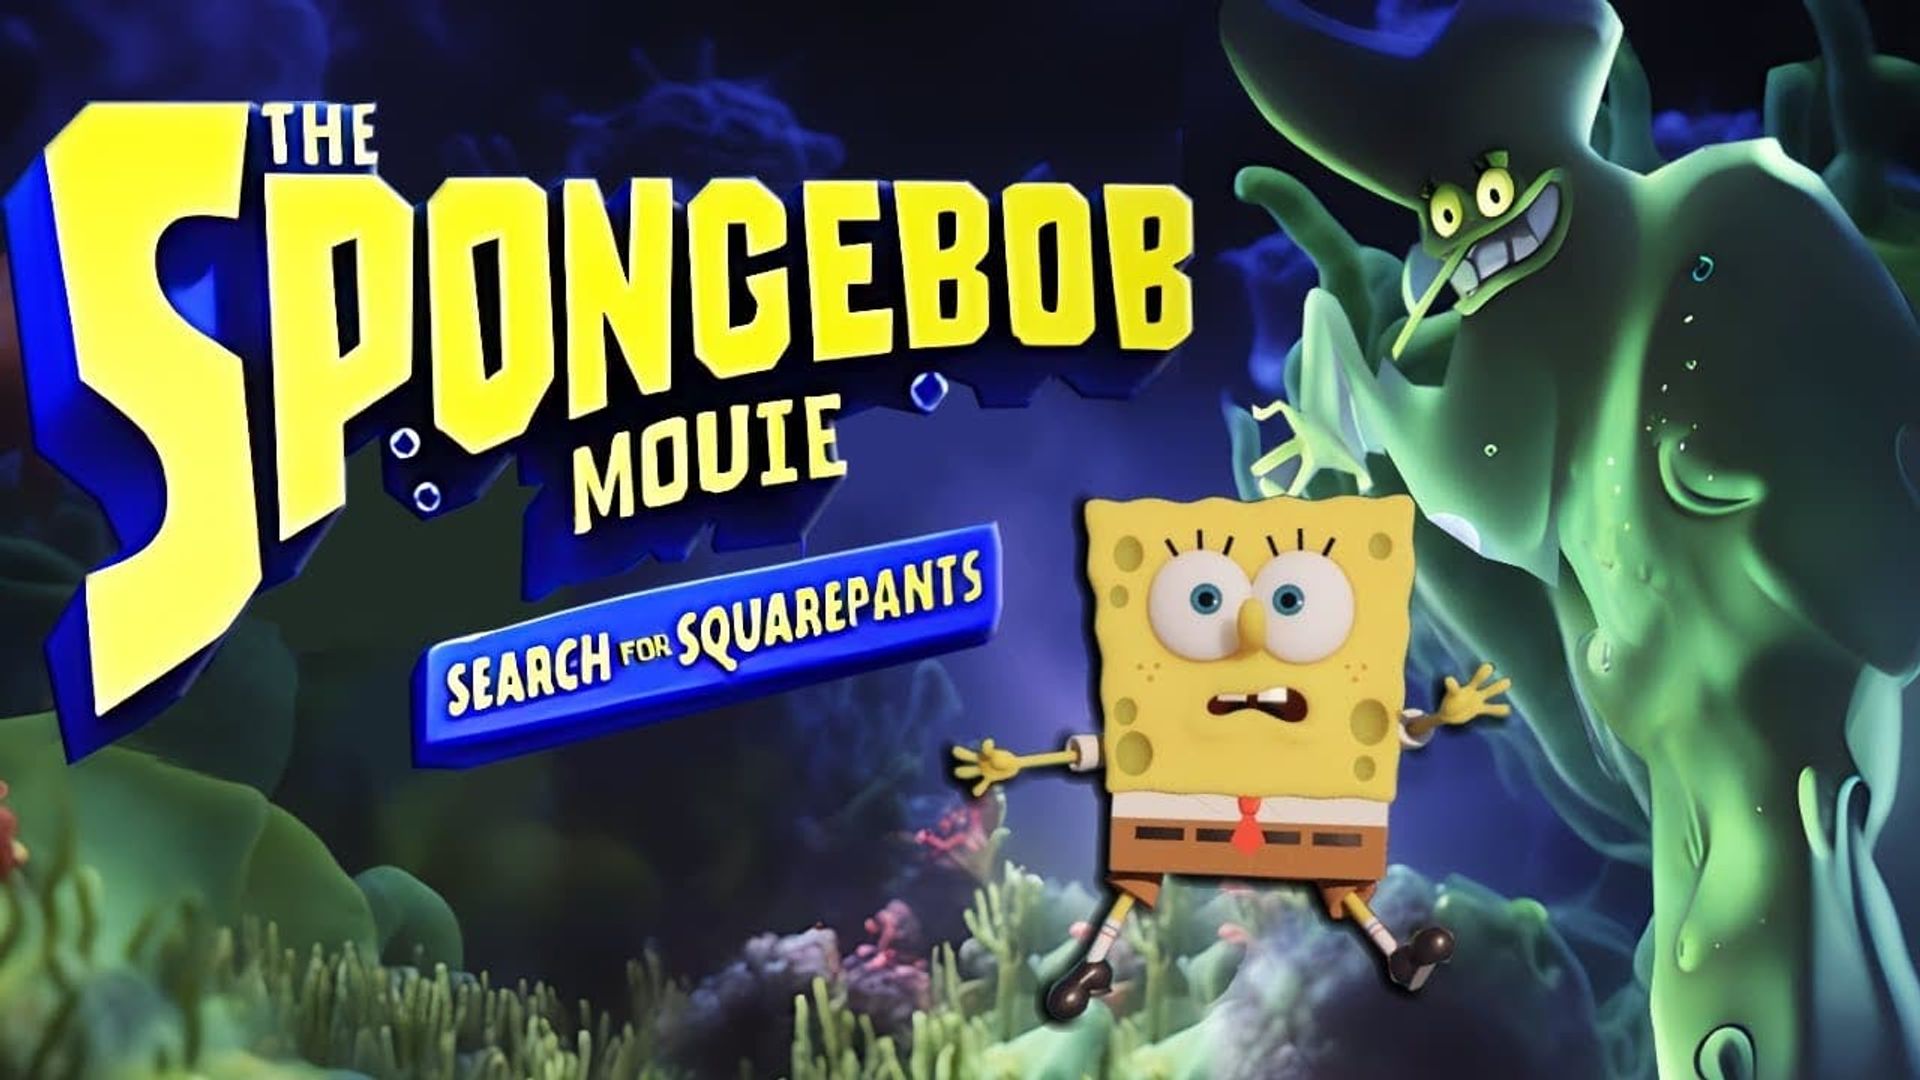 The SpongeBob Movie: Search for Squarepants background